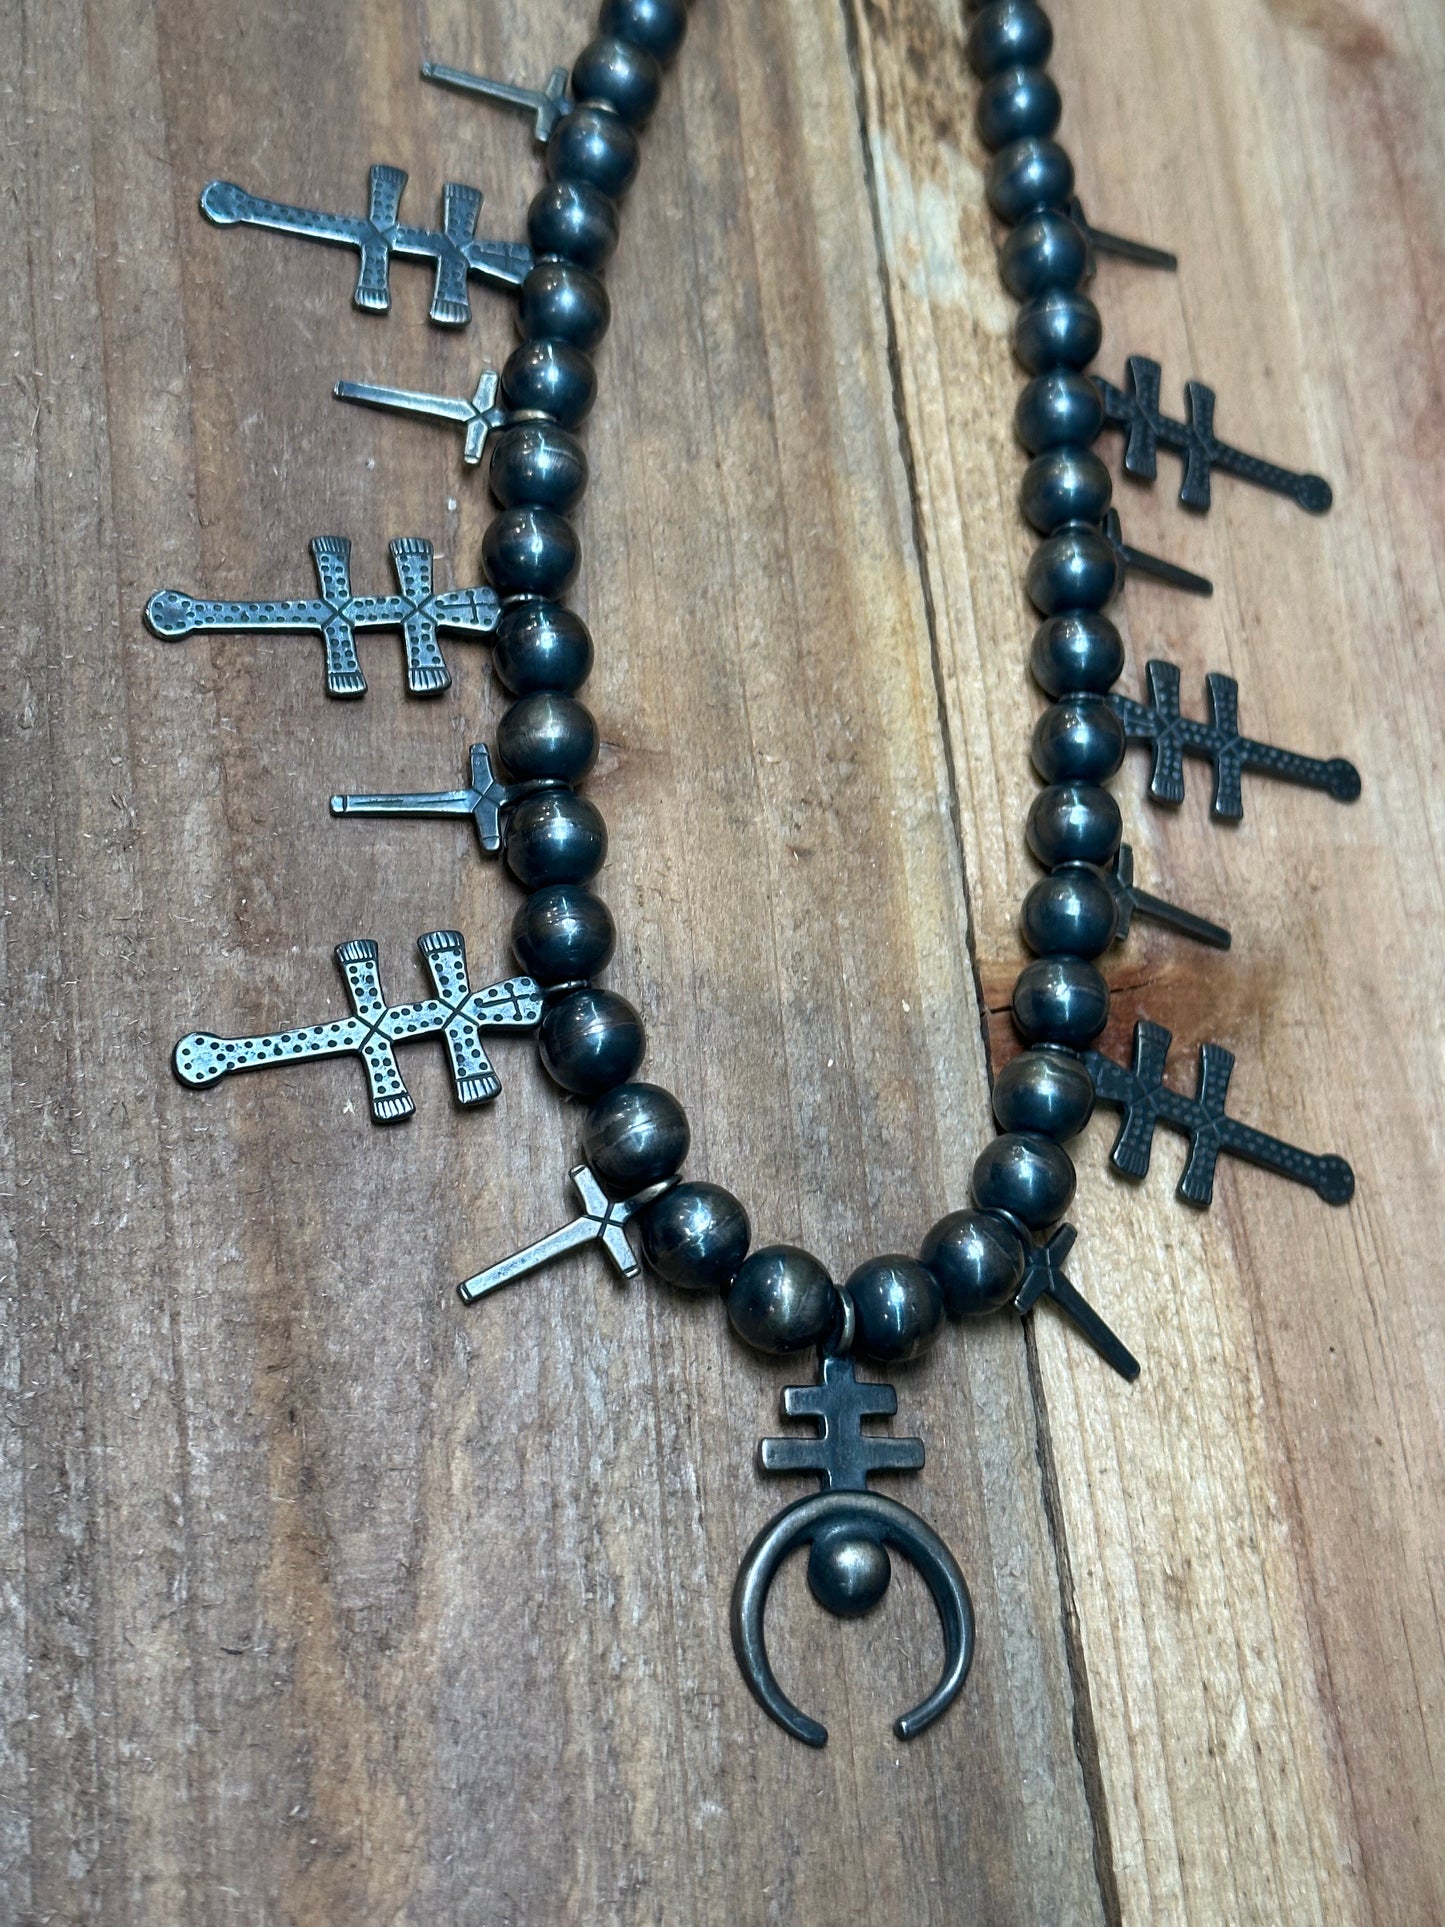 Vintage Navajo Pearl Necklace with Double Crosses